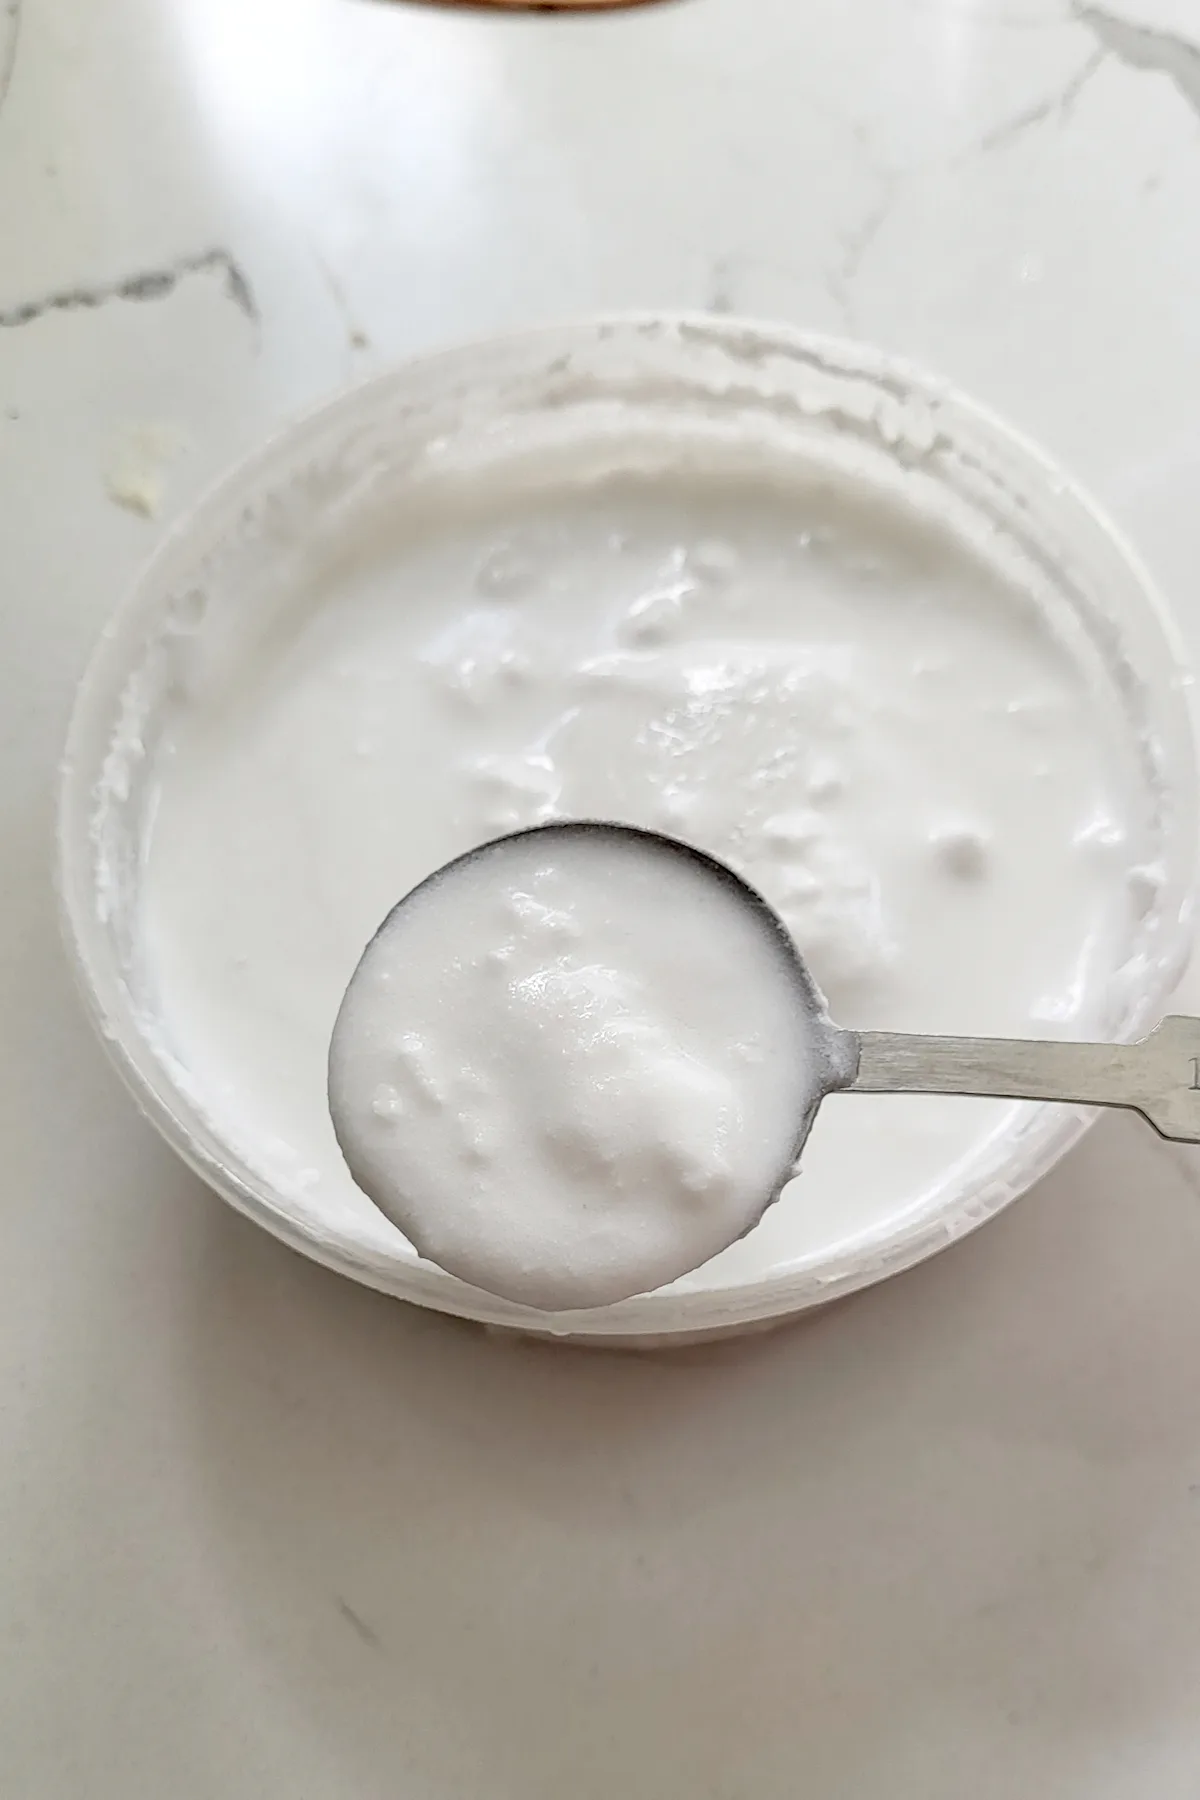 a spoonful of coconut cream skimmed from a bowl of coconut milk.